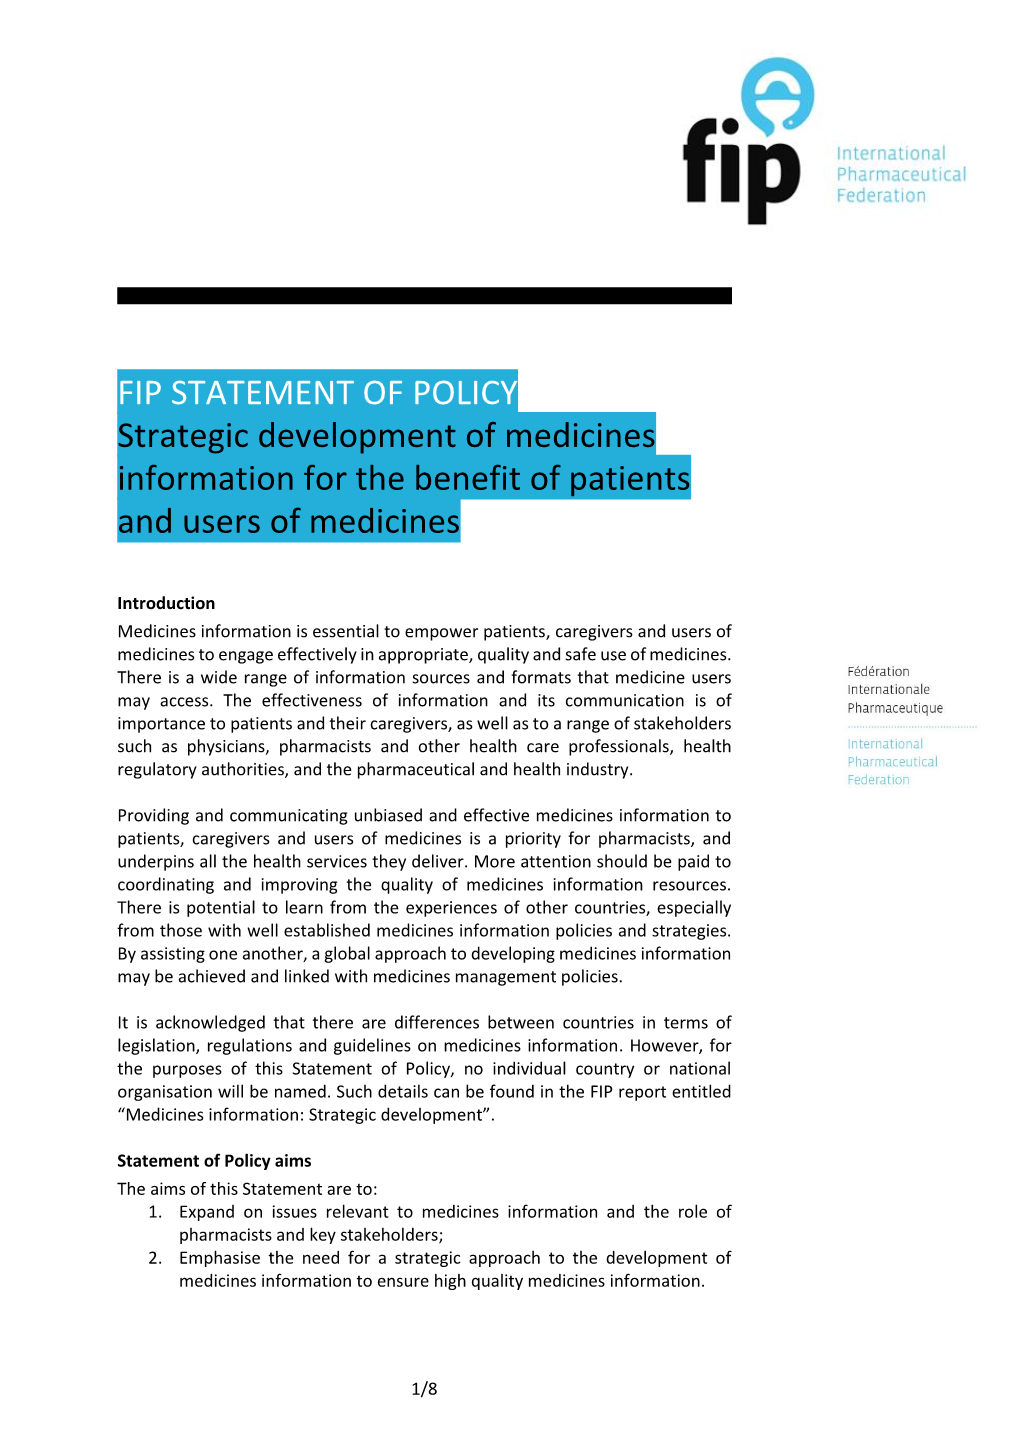 FIP STATEMENT of POLICY Strategic Development of Medicines Information for the Benefit of Patients and Users of Medicines